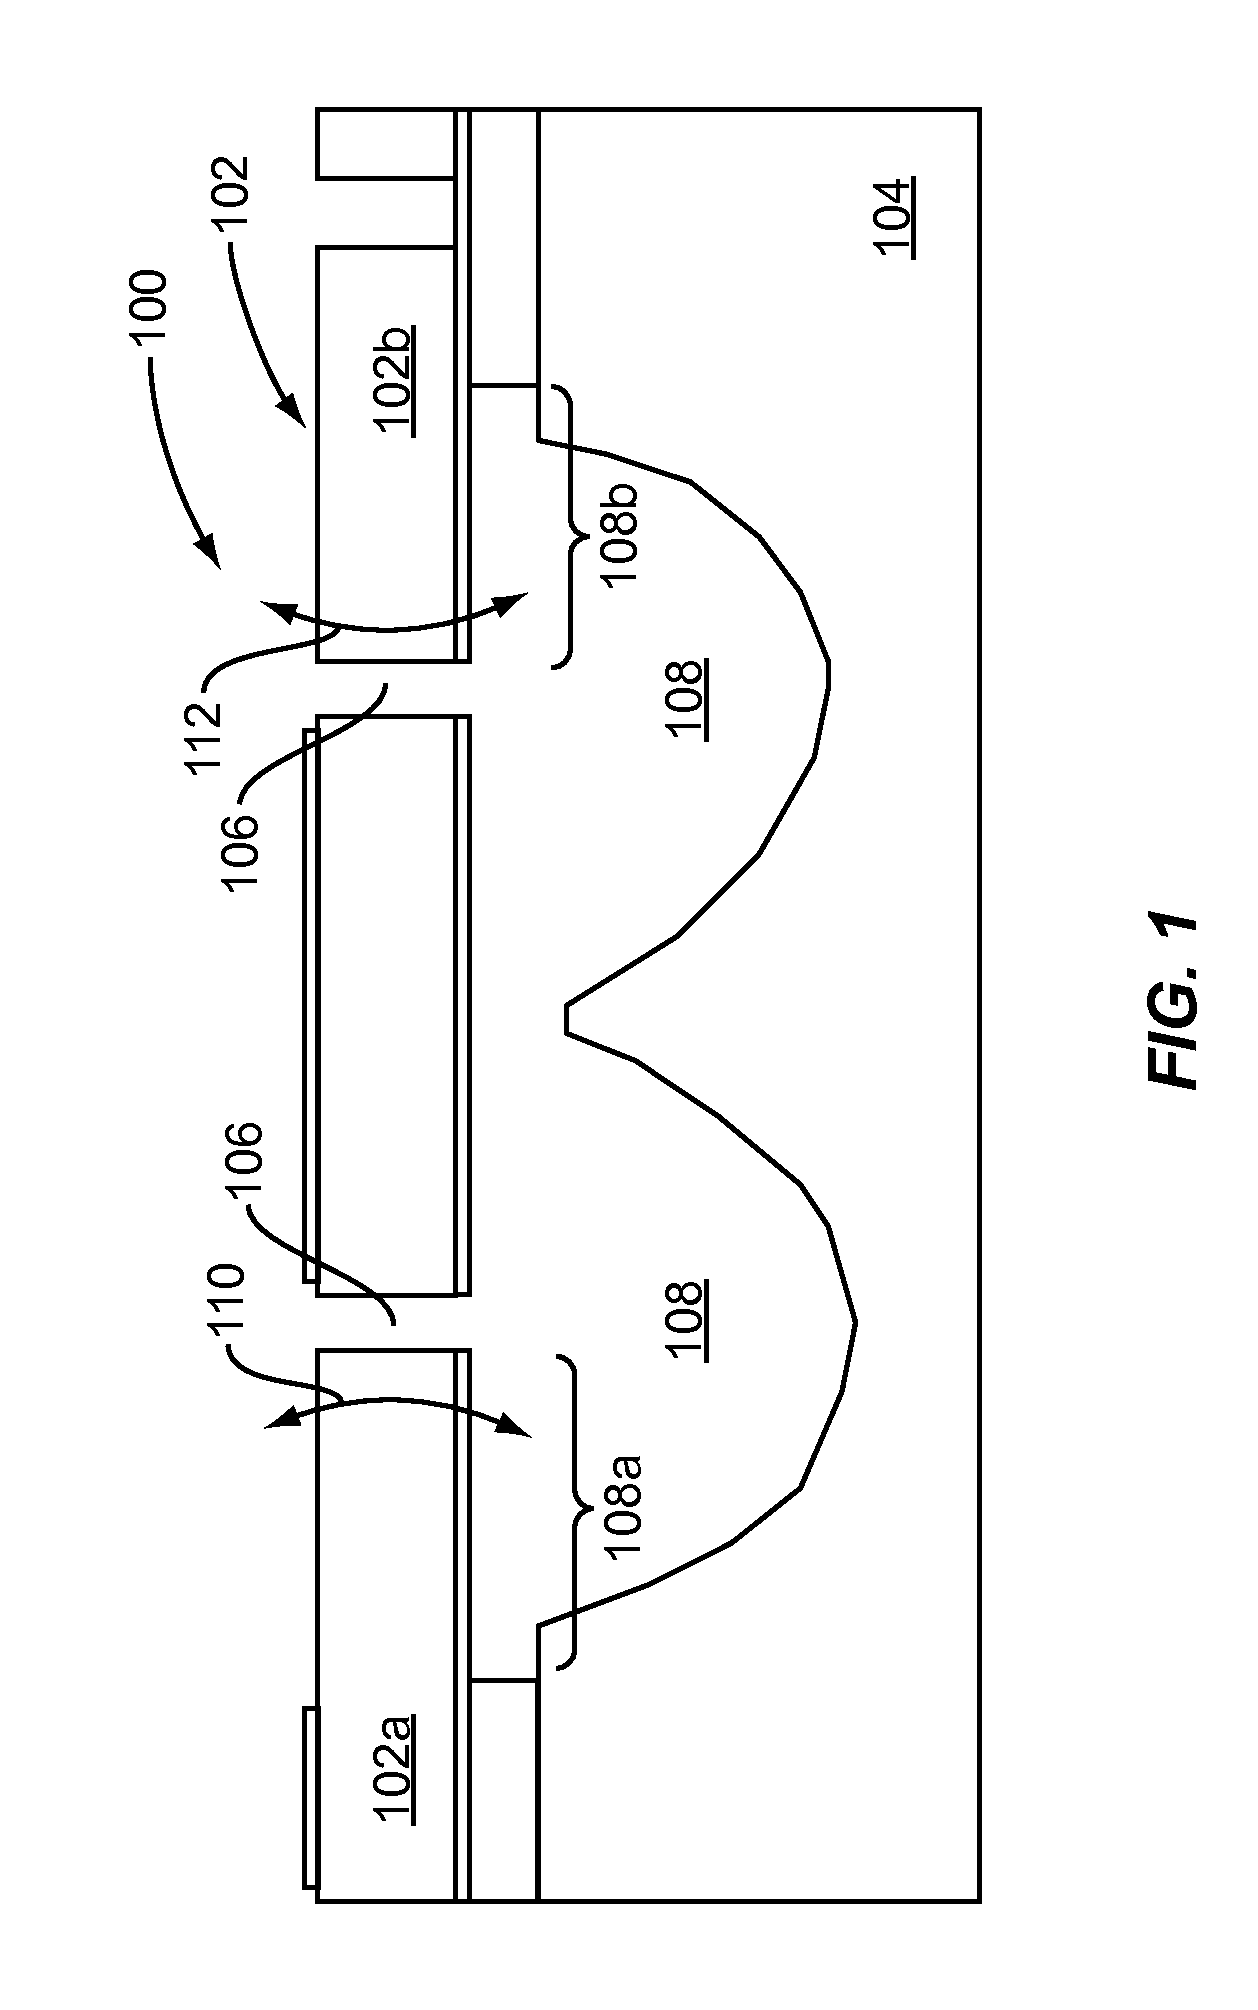 Planarized sacrificial layer for MEMS fabrication